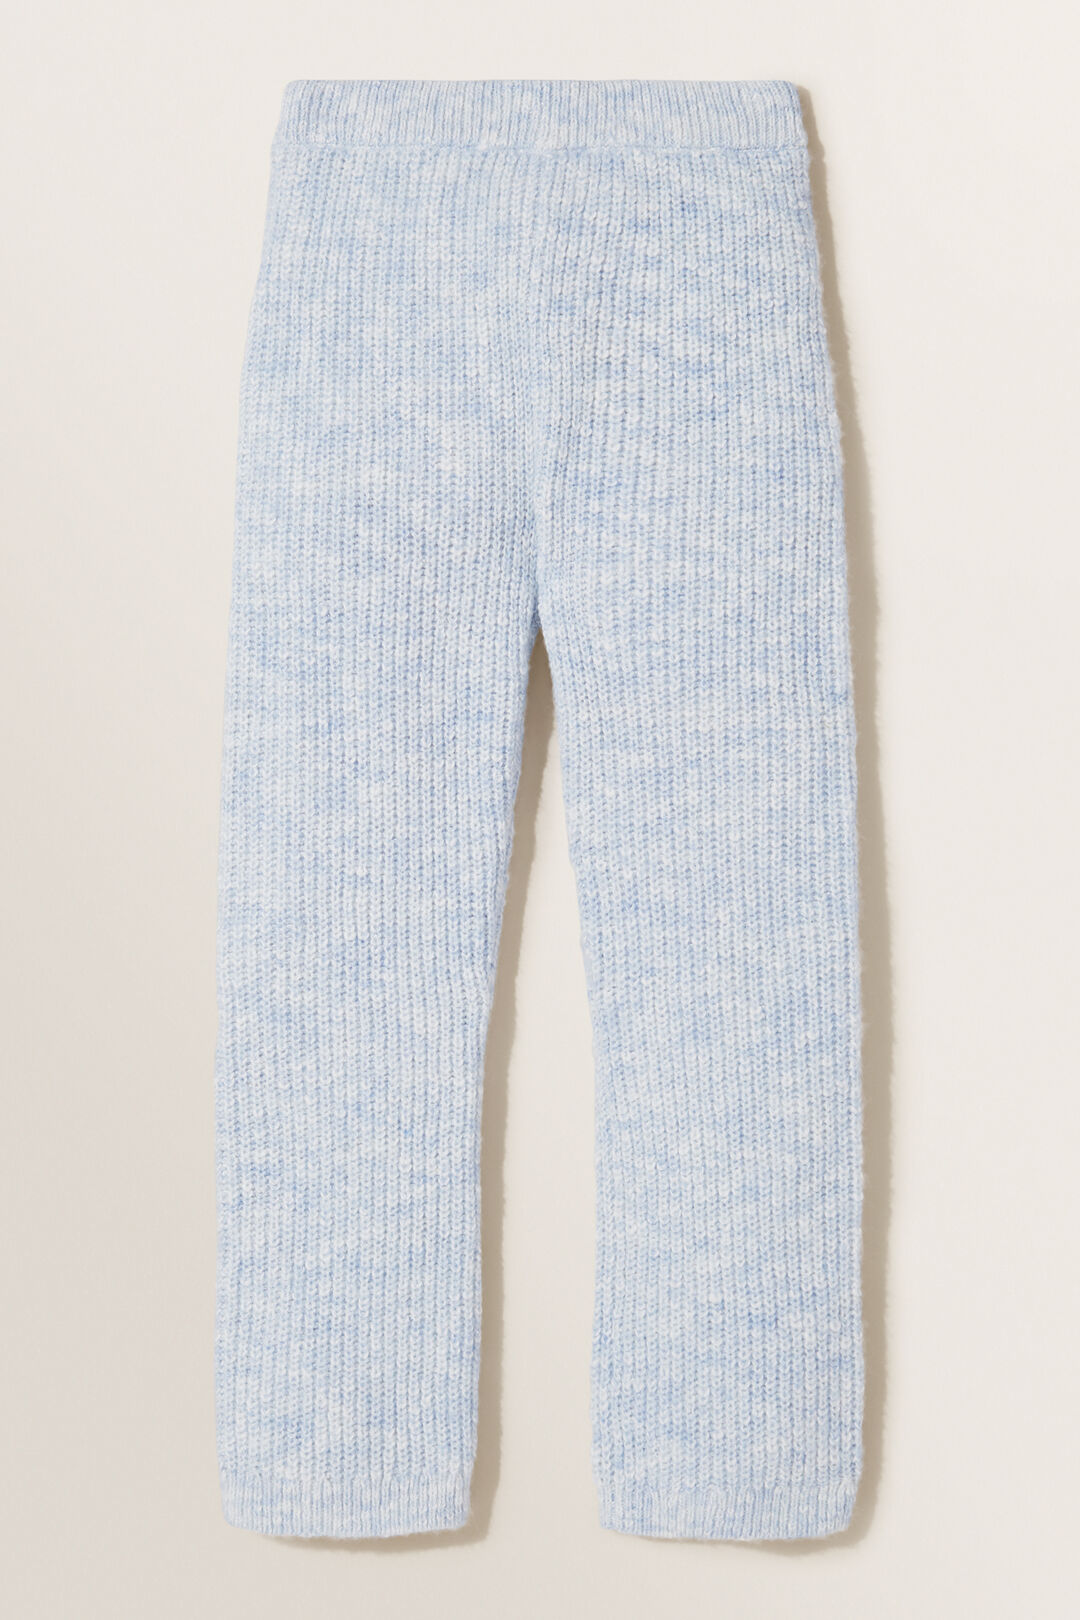 Speckle Knit Trousers  Bluebelle Marle  hi-res